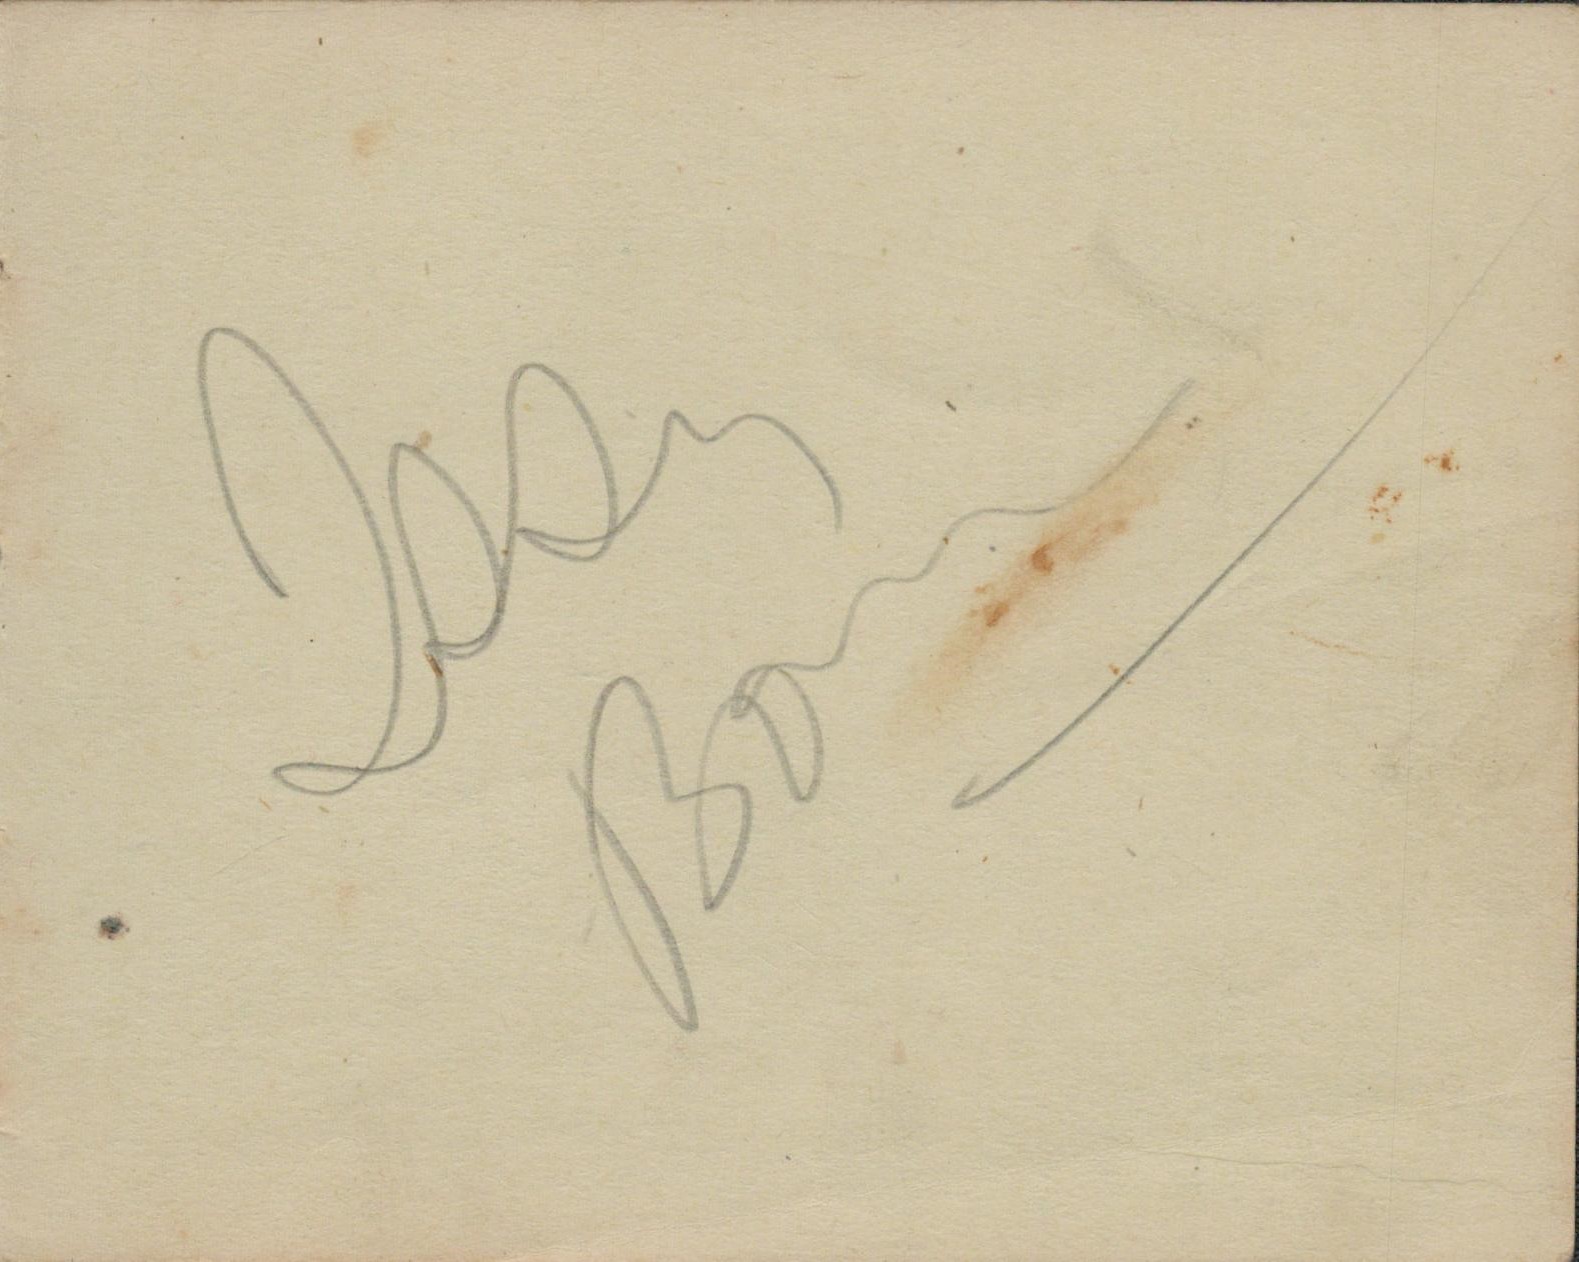 Issy Bonn signed Autograph page 5x4 Inch. Was a British comedian, singer, actor, and theatrical